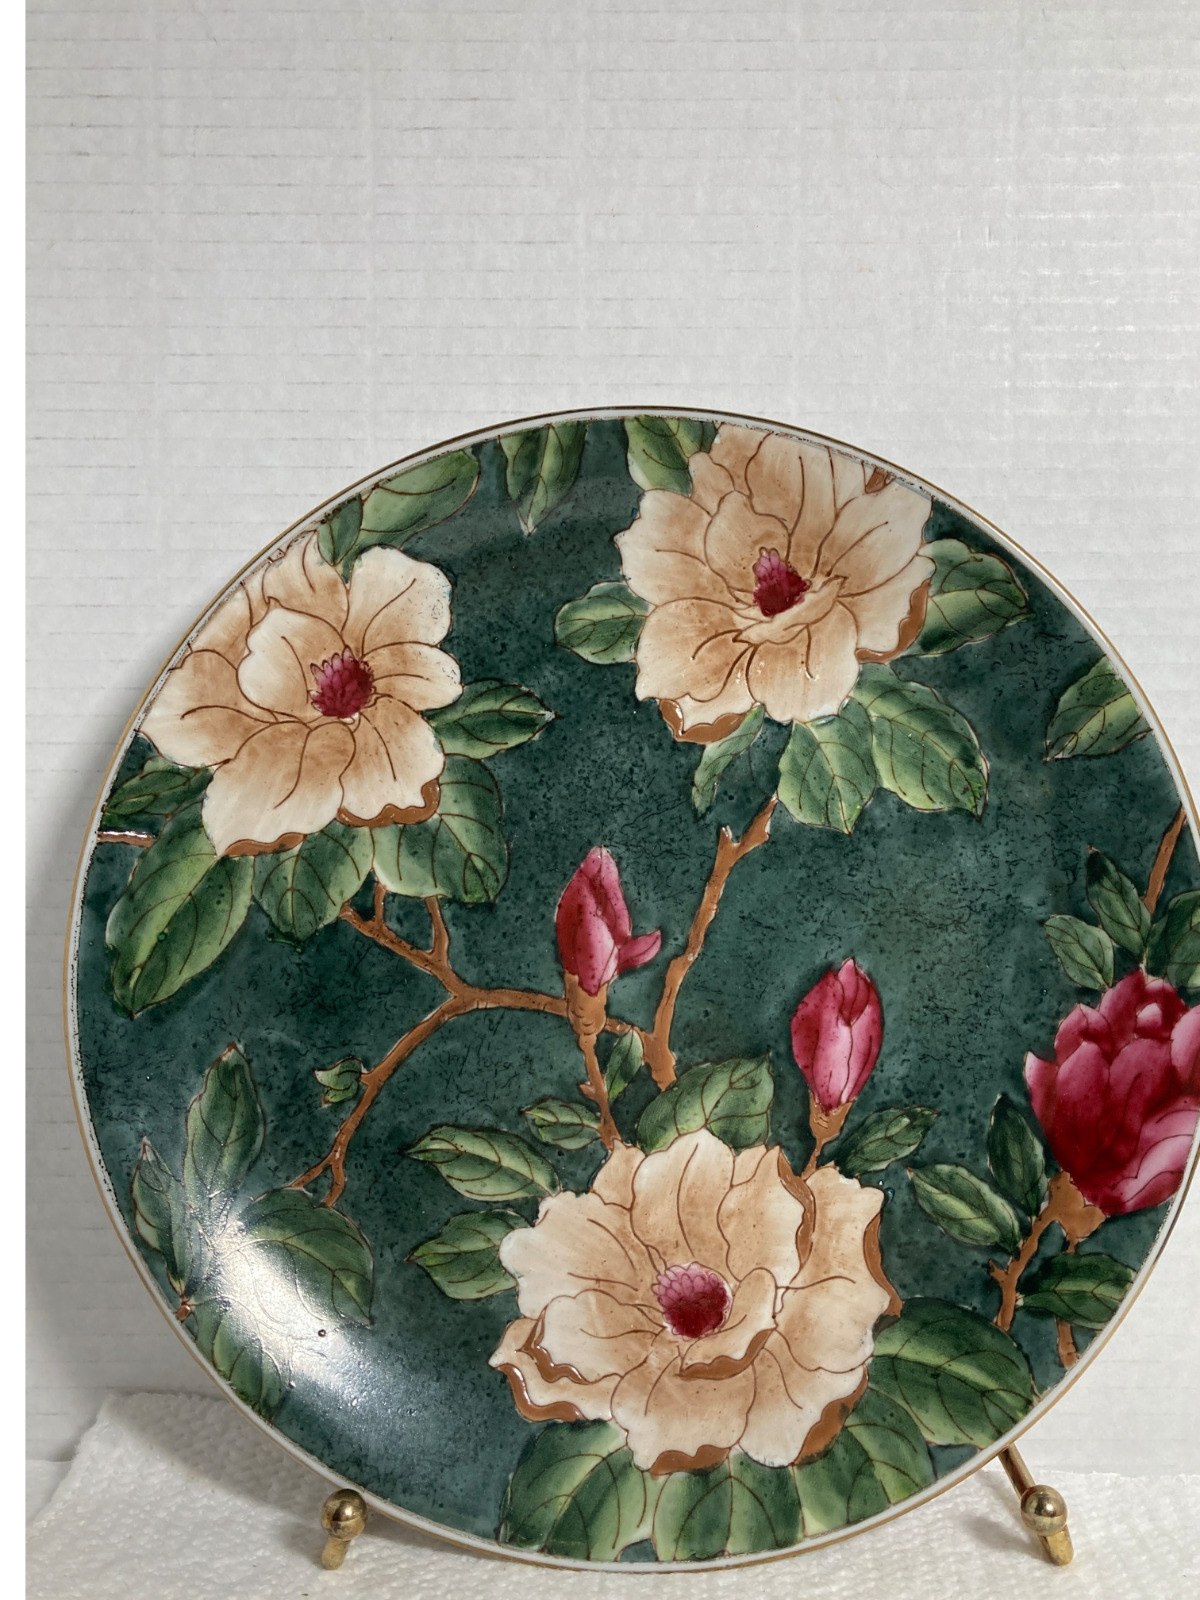 Wall or Tabletop Ceramic Plate with Flower Design NWT